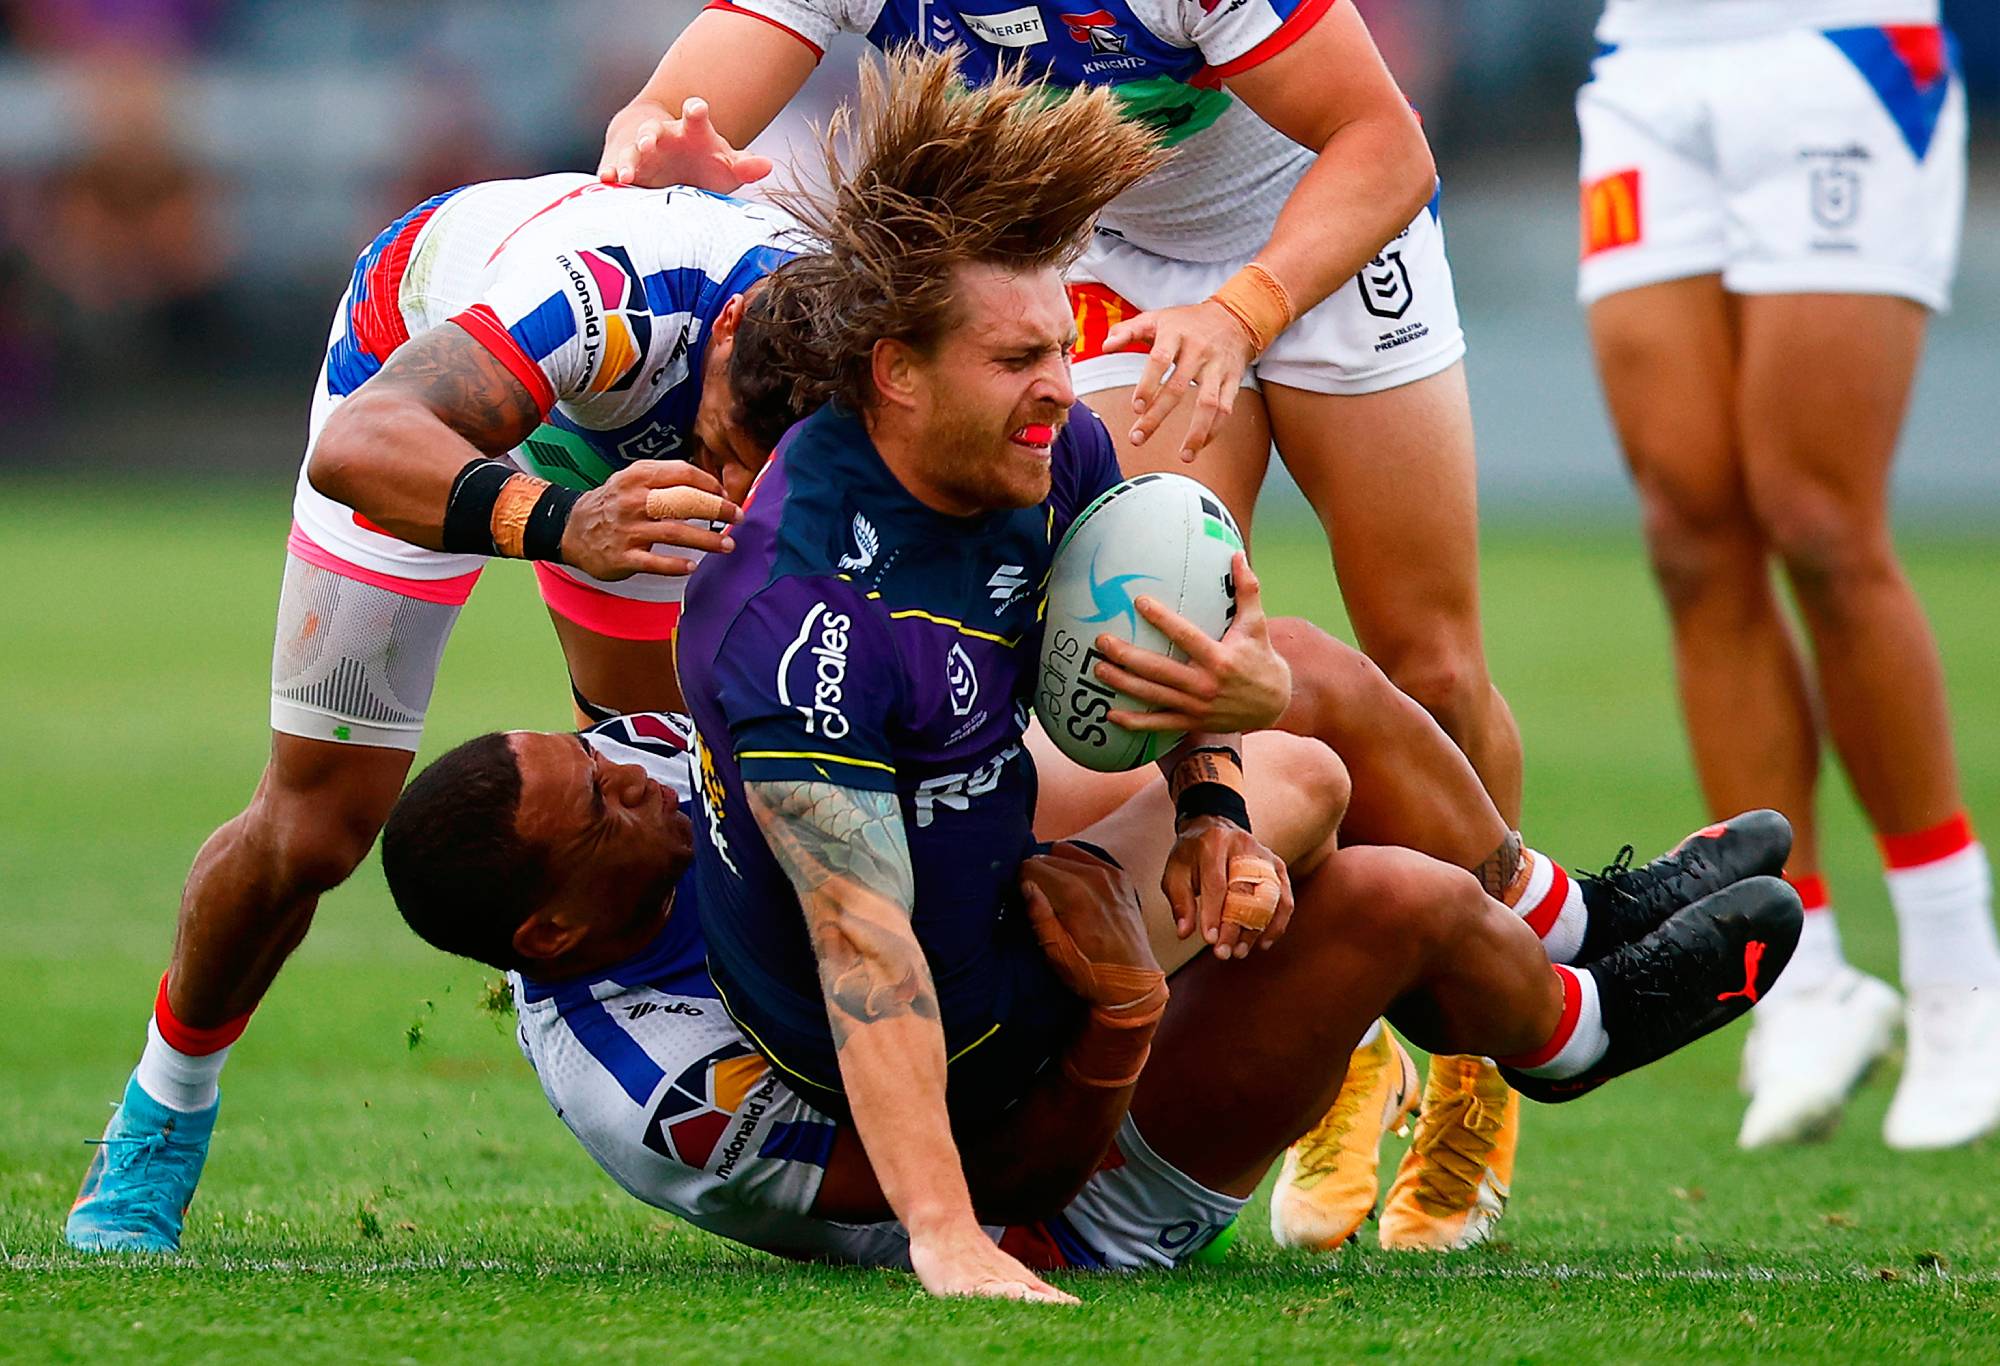 BALLARAT, AUSTRALIA - FEBRUARY 27: Cameron Munster of the Storm passes the ball during the NRL Trial Match between the Melbourne Storm and the Newcastle Knights at Mars Stadium on February 27, 2022 in Ballarat, Australia. (Photo by Daniel Pockett/Getty Images)